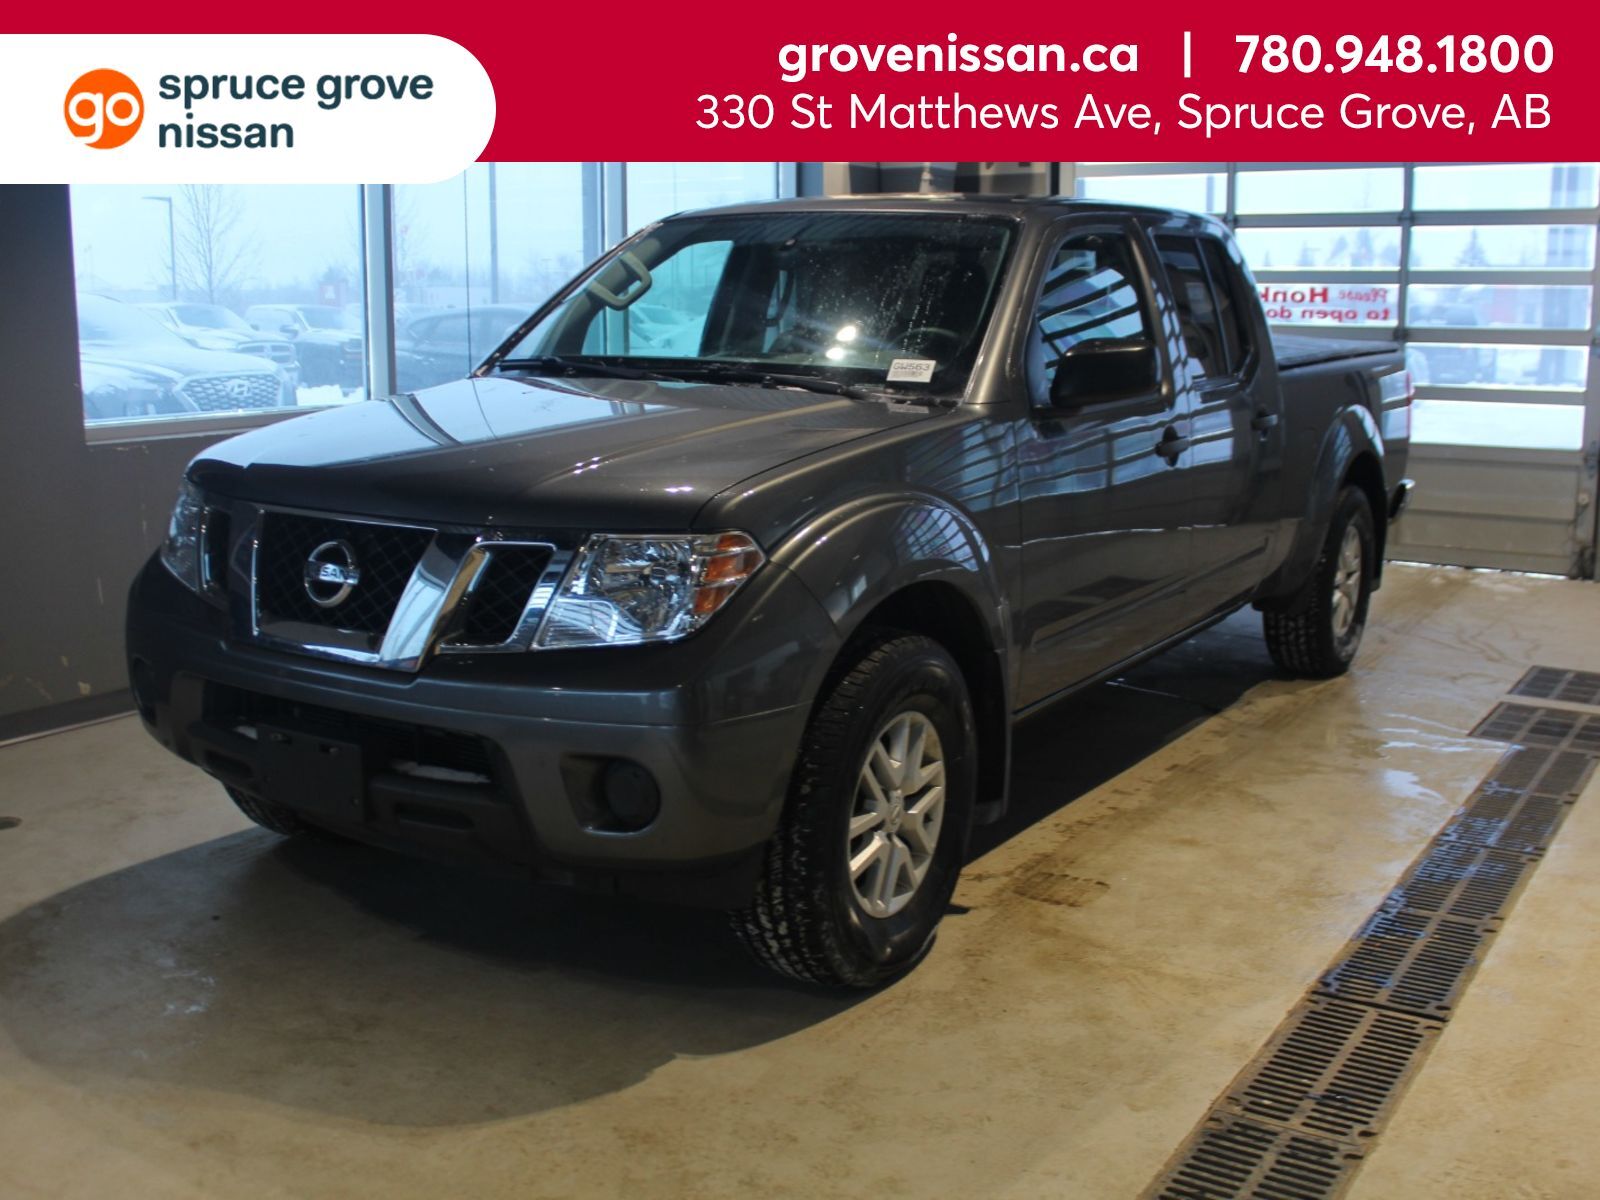 2019 Nissan Frontier Crew Cab SV Long Bed 4x4 Auto